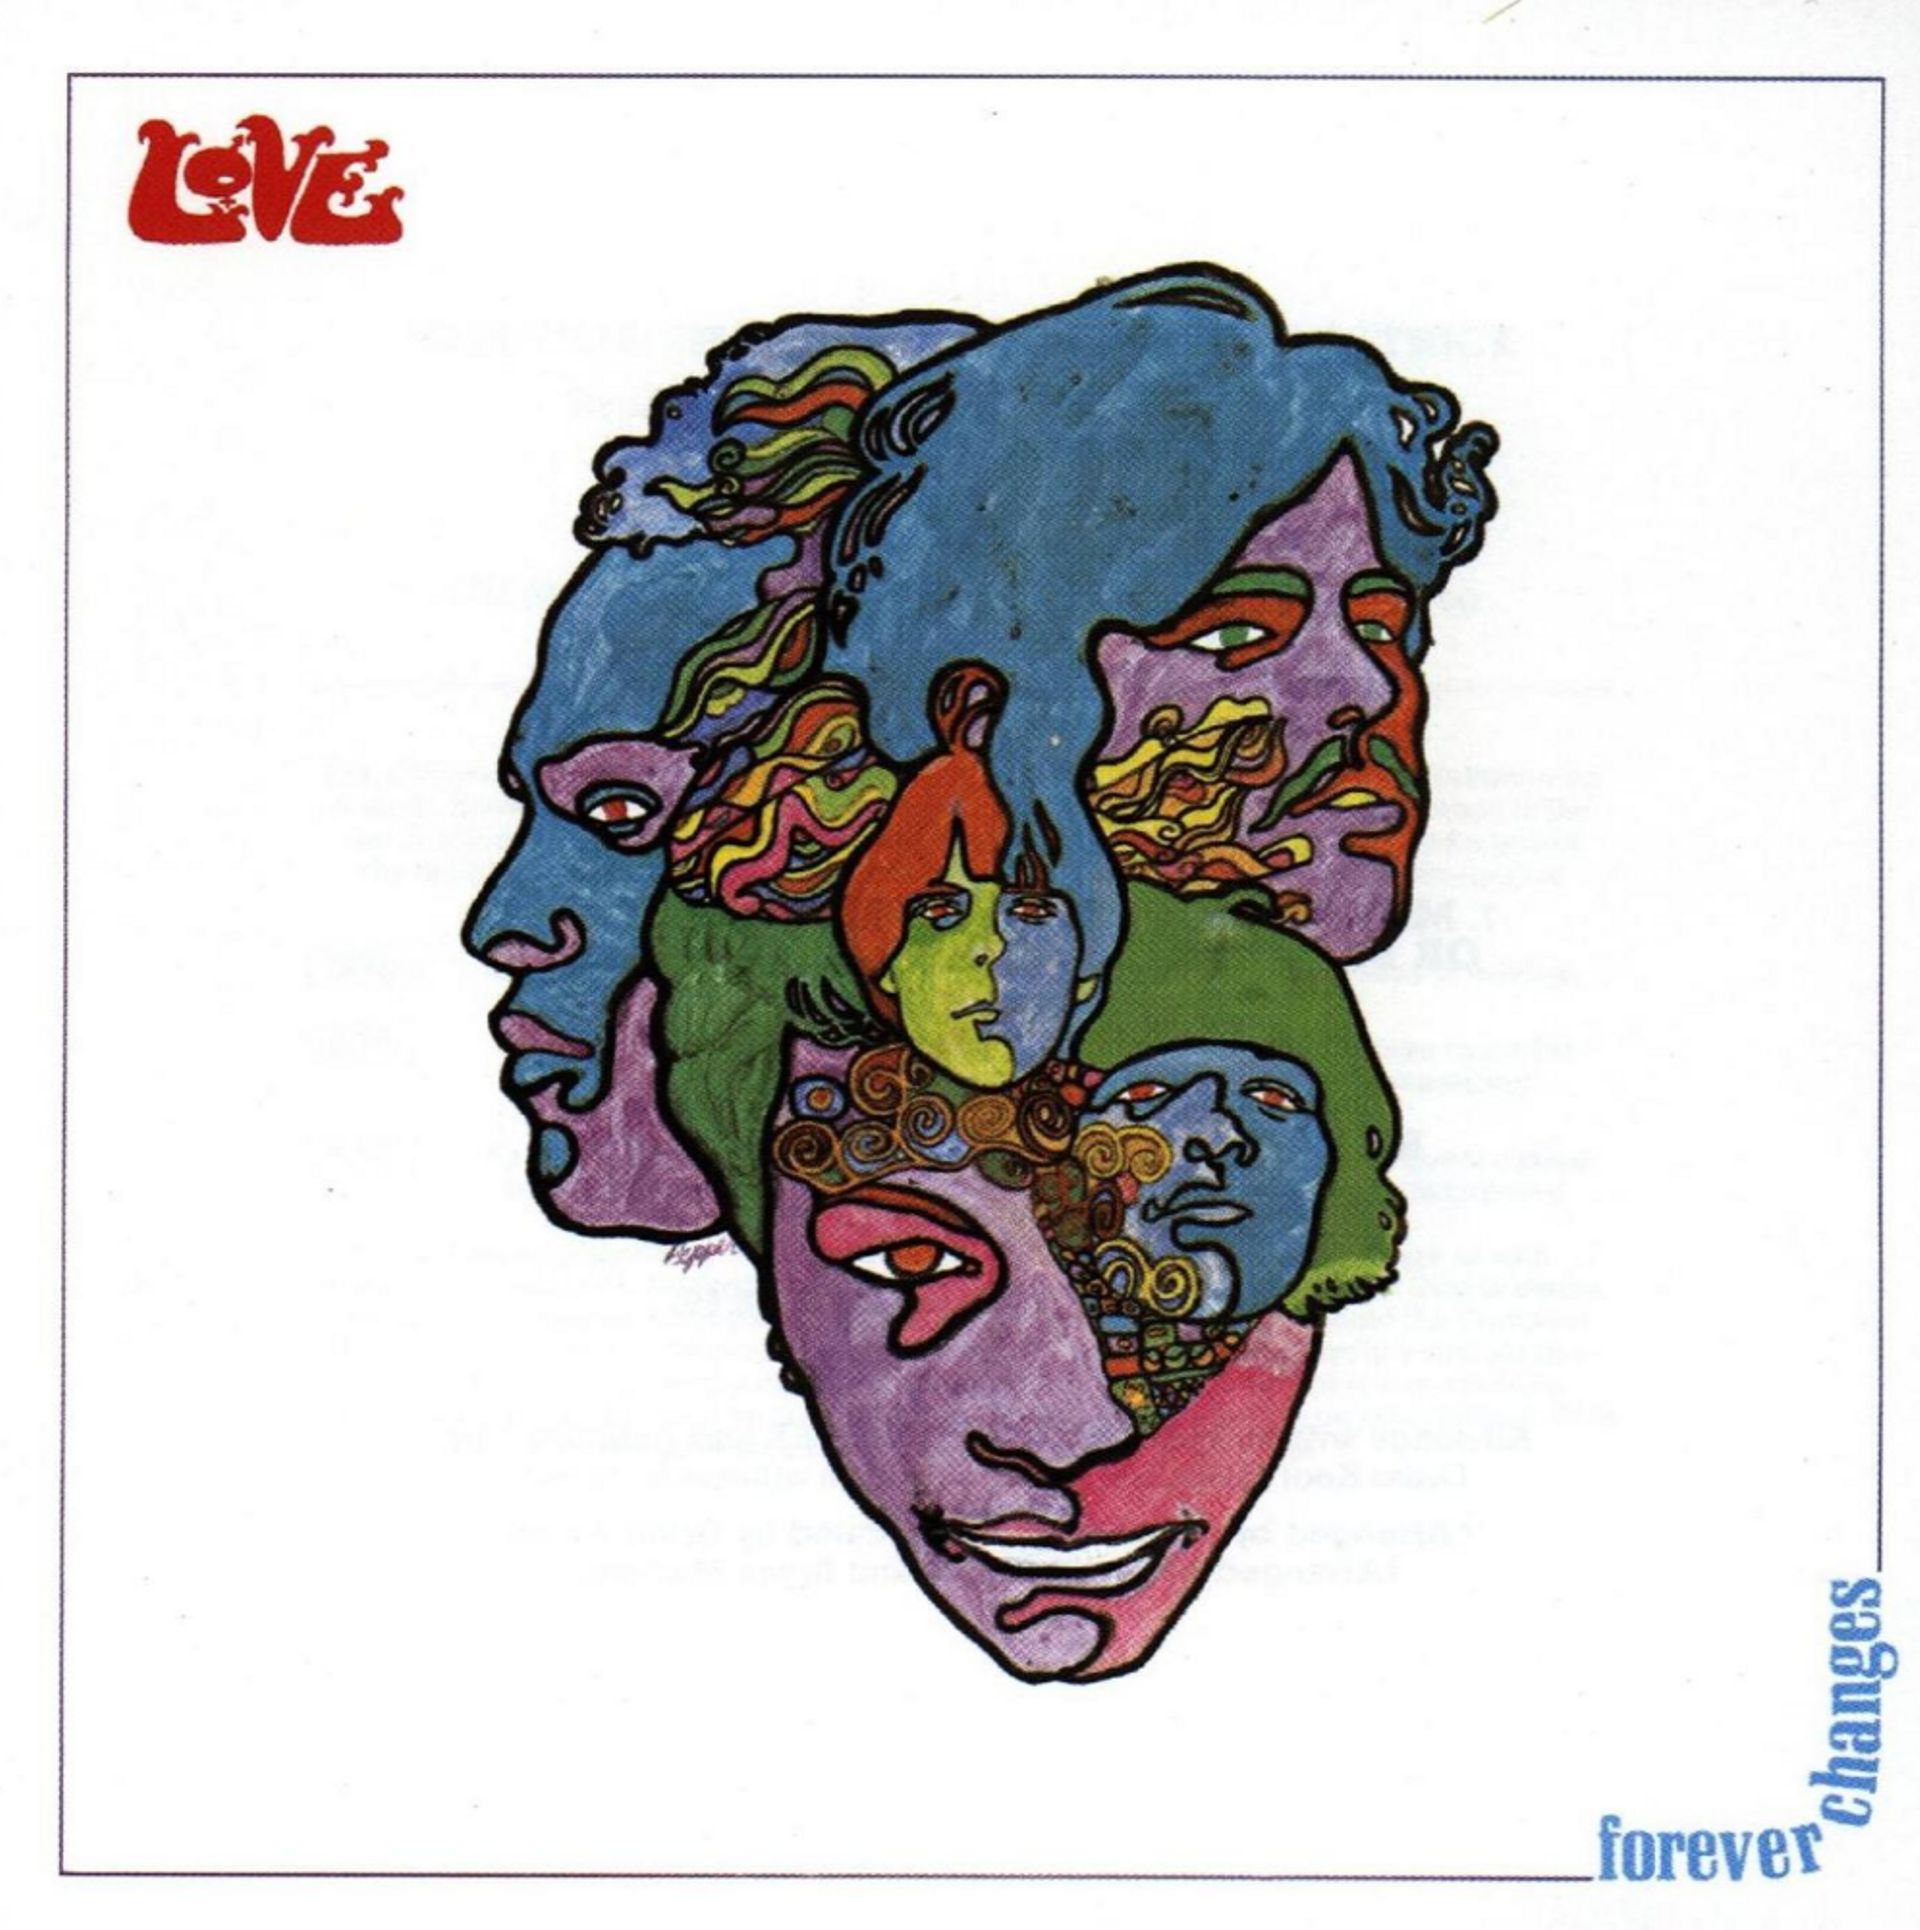  ''Forever Changes" 1967